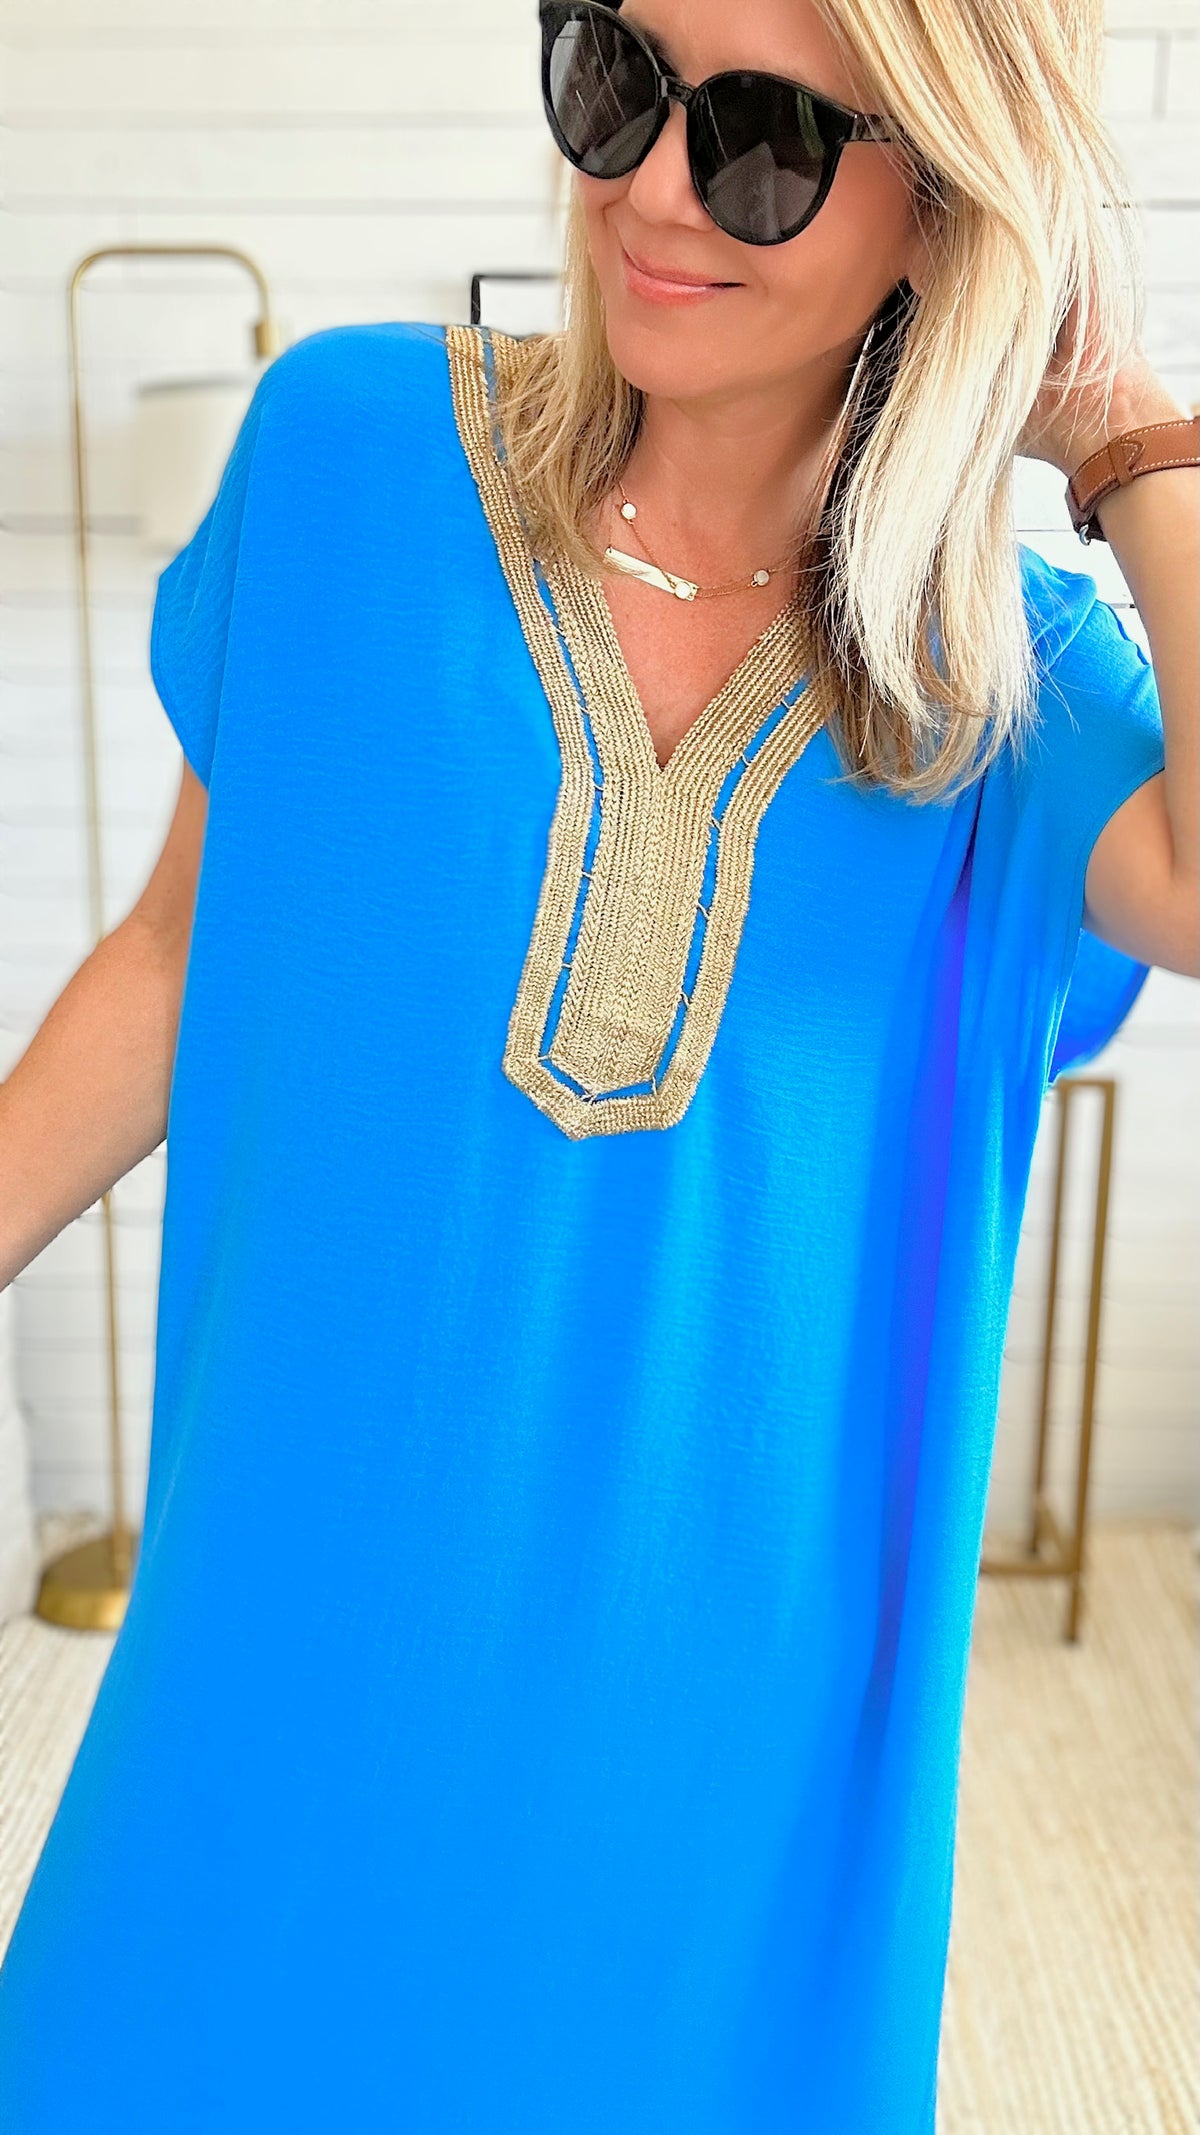 Greek Goddess Kaftan Dress - Turquoise-200 Dresses/Jumpsuits/Rompers-Venti6 Outlet-Coastal Bloom Boutique, find the trendiest versions of the popular styles and looks Located in Indialantic, FL